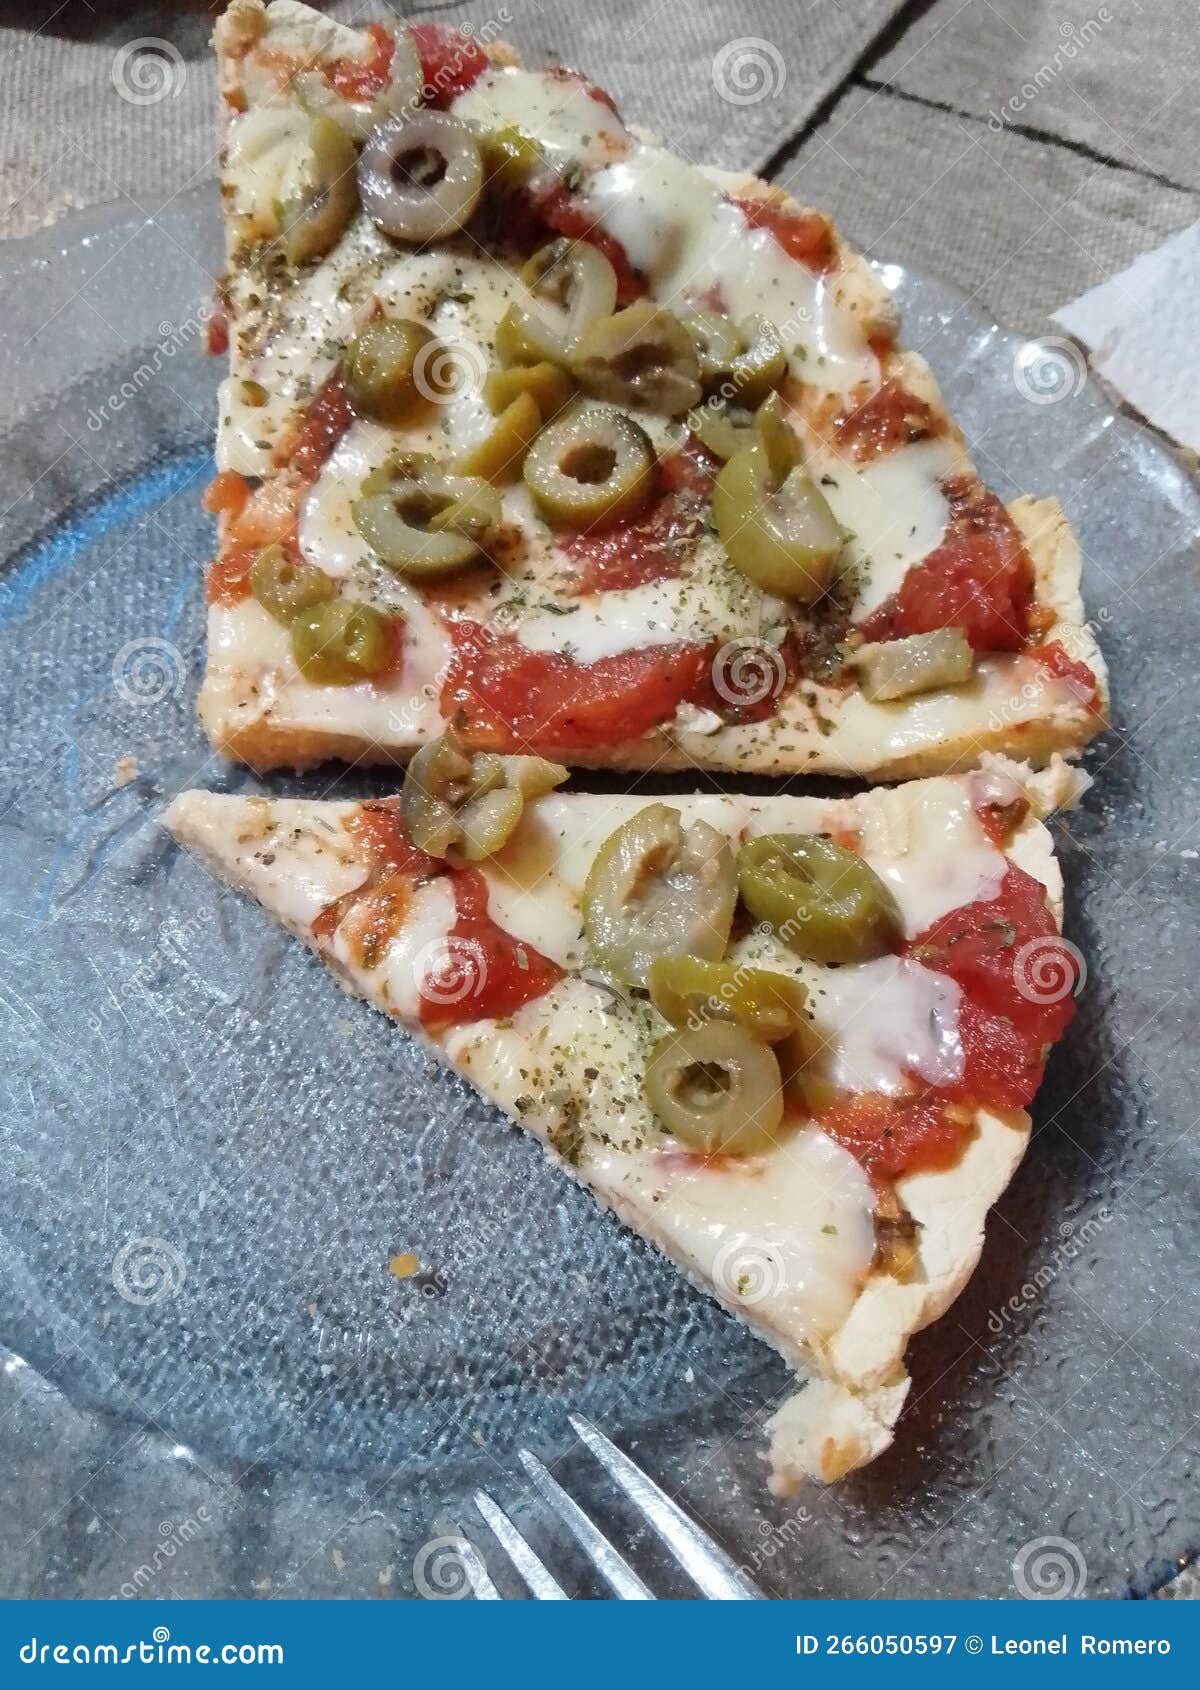 meal pizza gluten free for lunch or dinner